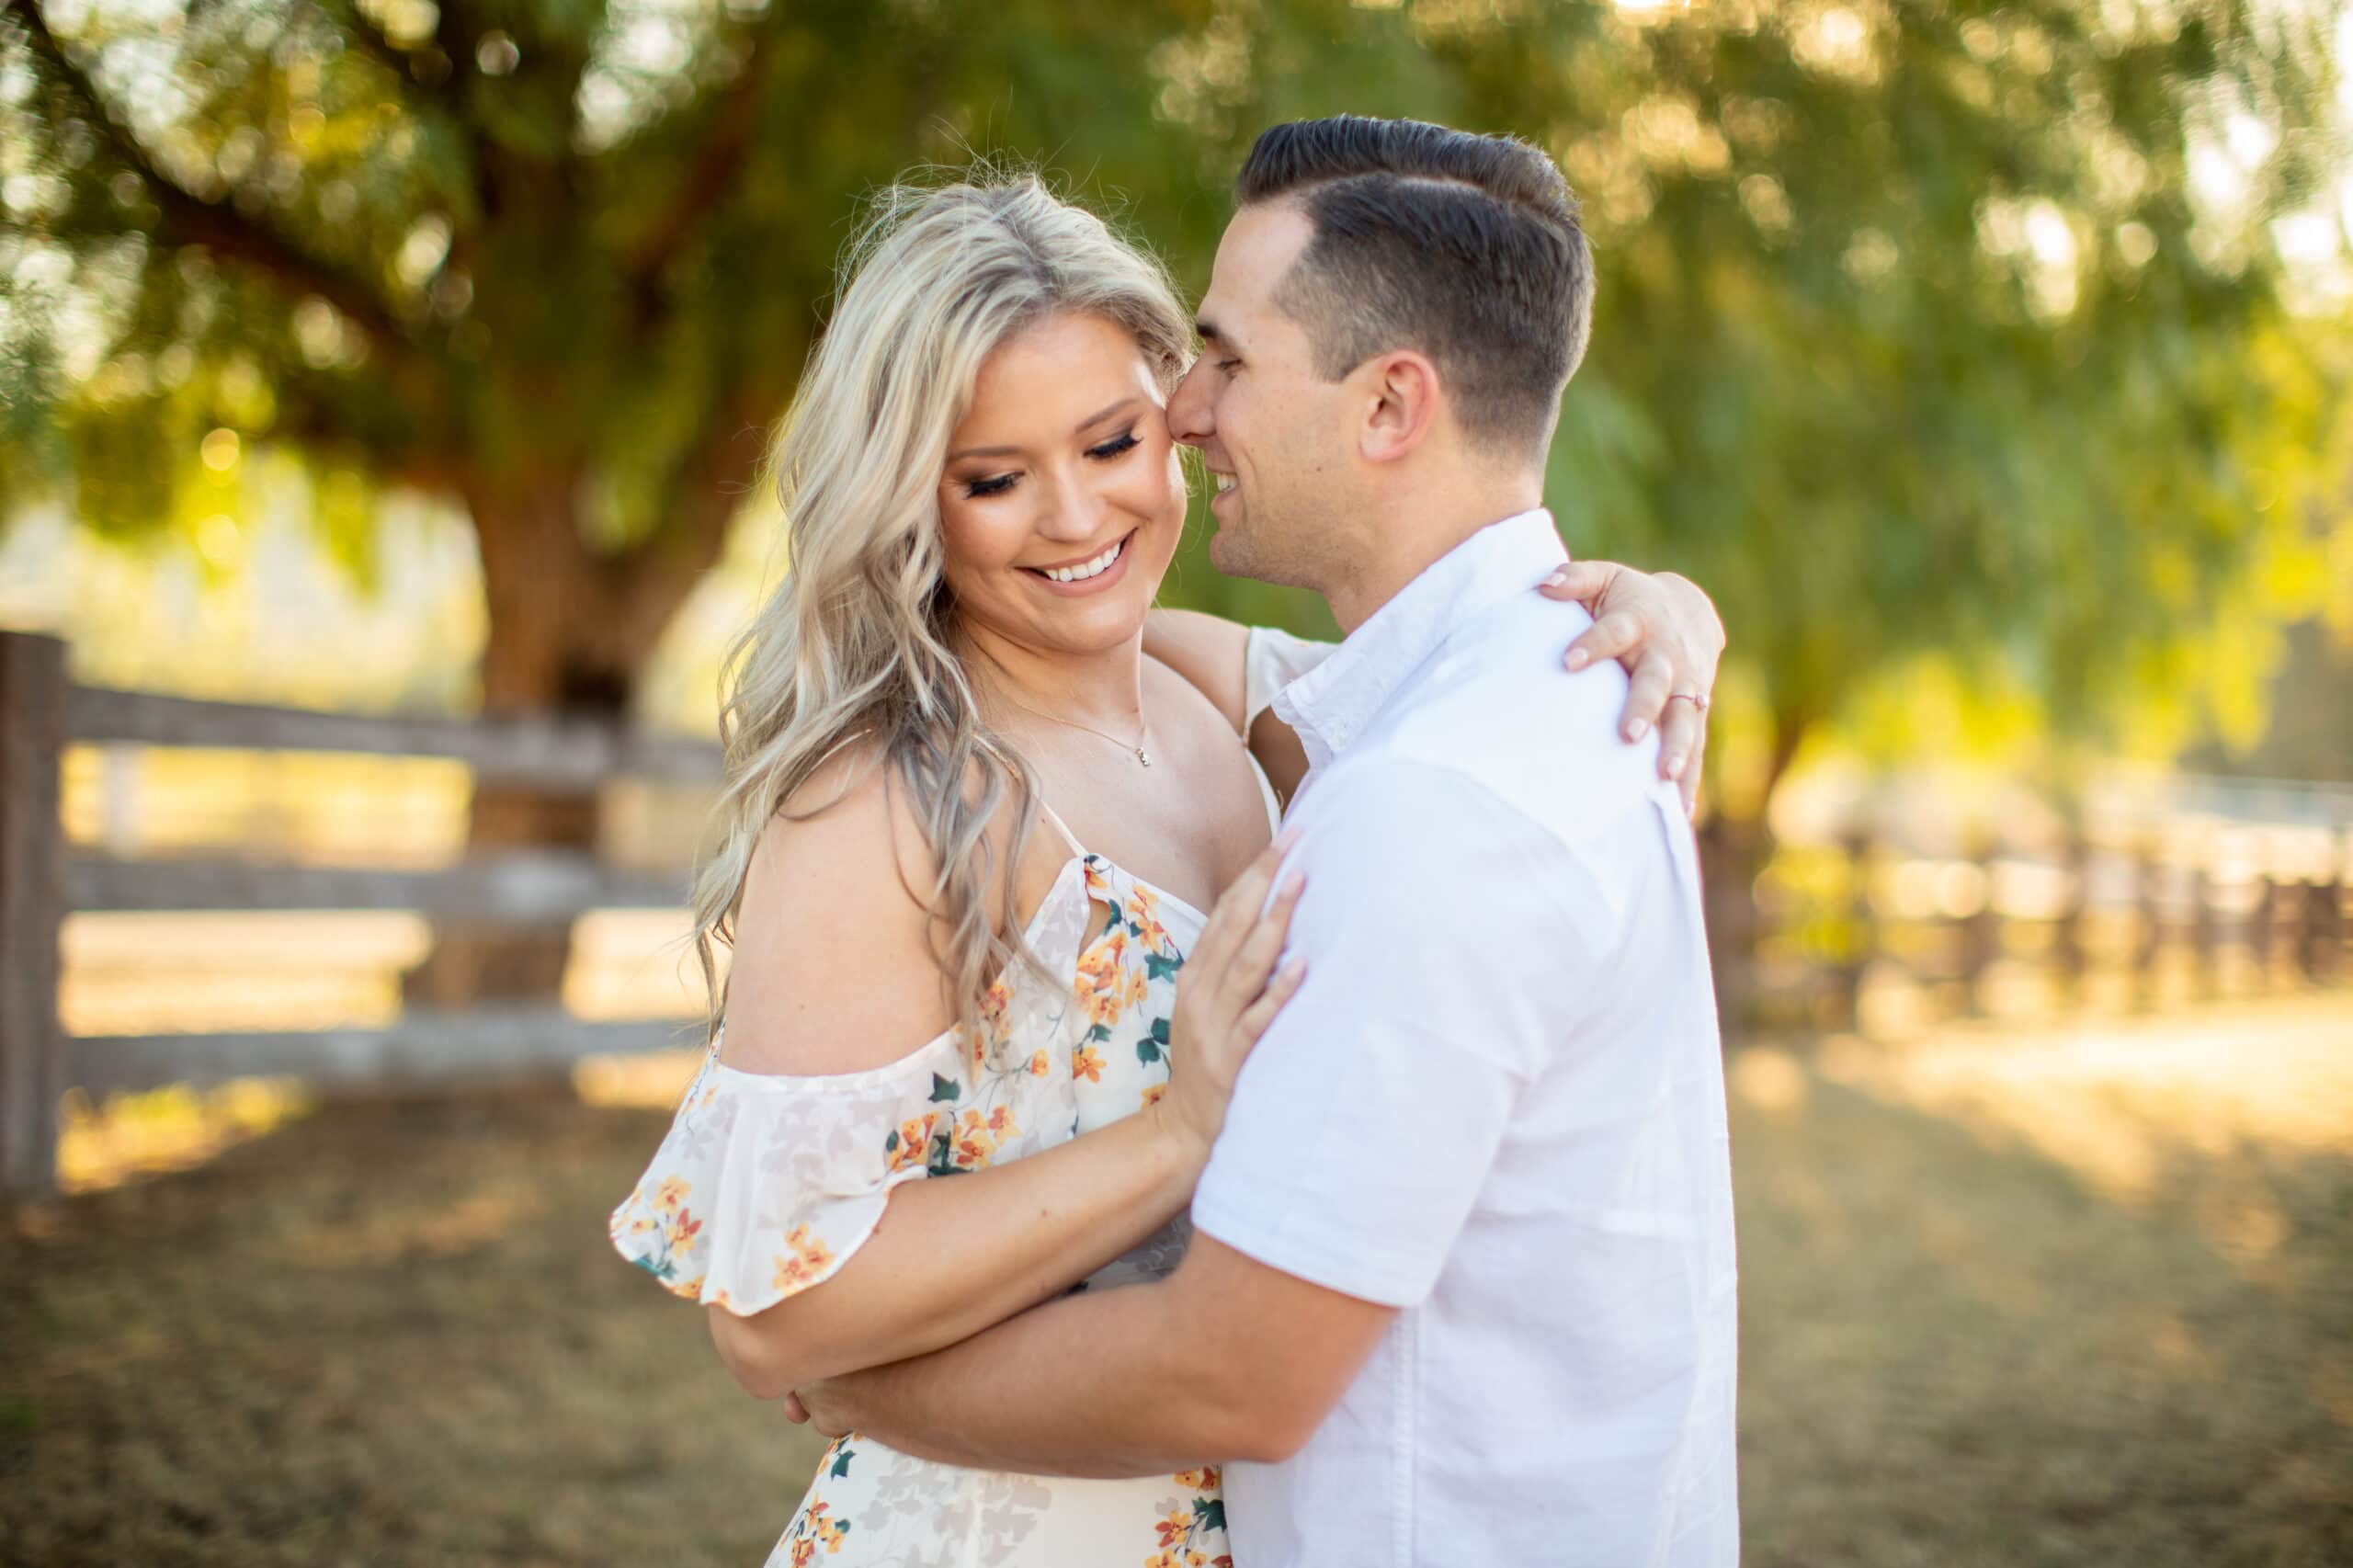 Murrieta Ranch Engagement Session by Courtney McManaway Photography